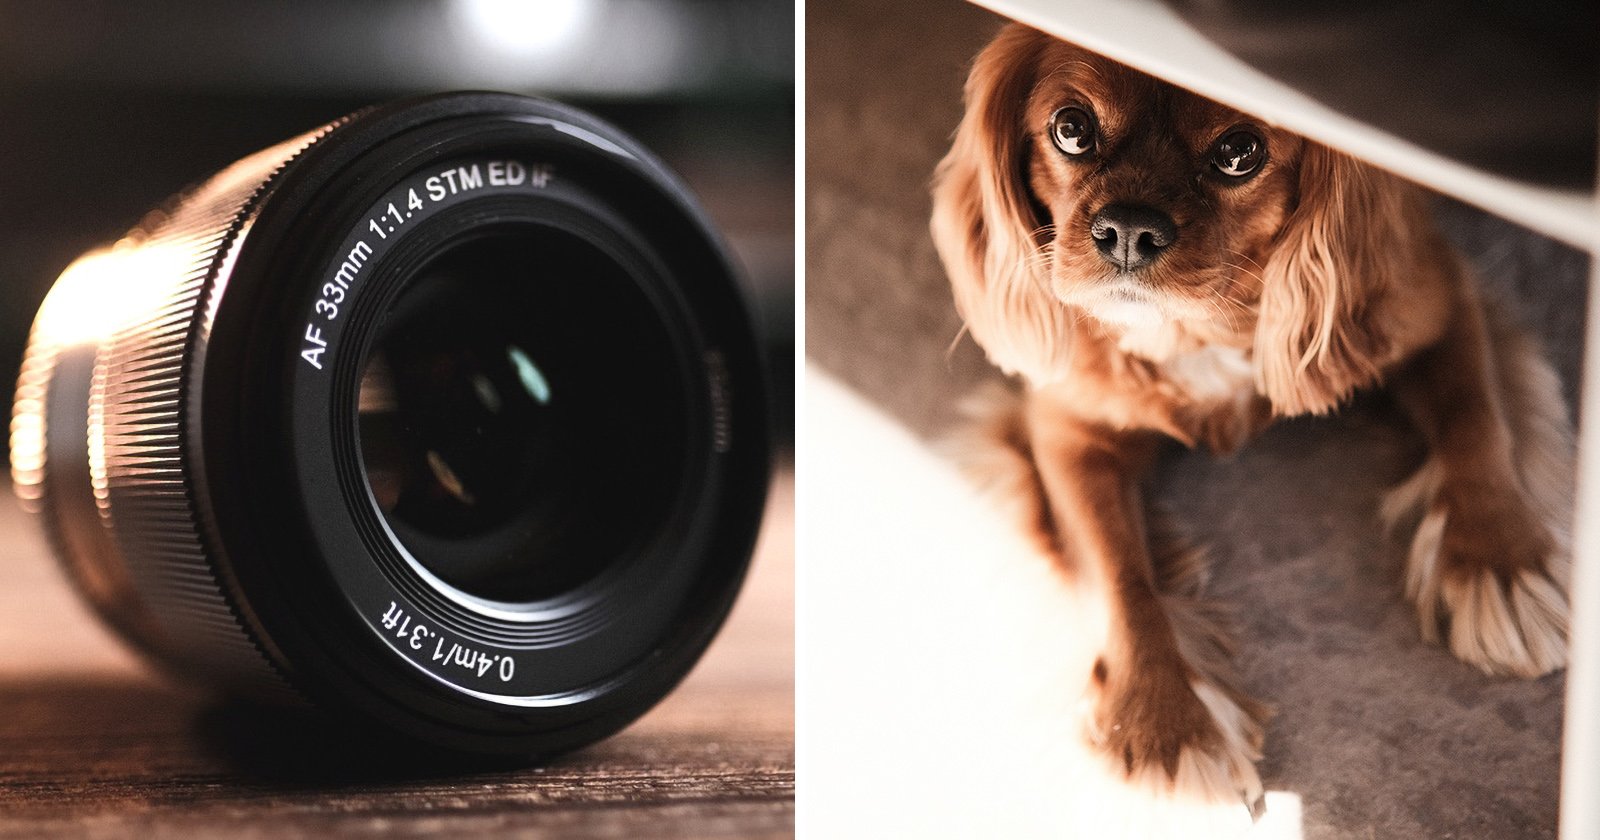 Lens Test: The Viltrox 33mm f/1.4 is a Nifty Fifty for Fuji Photographers